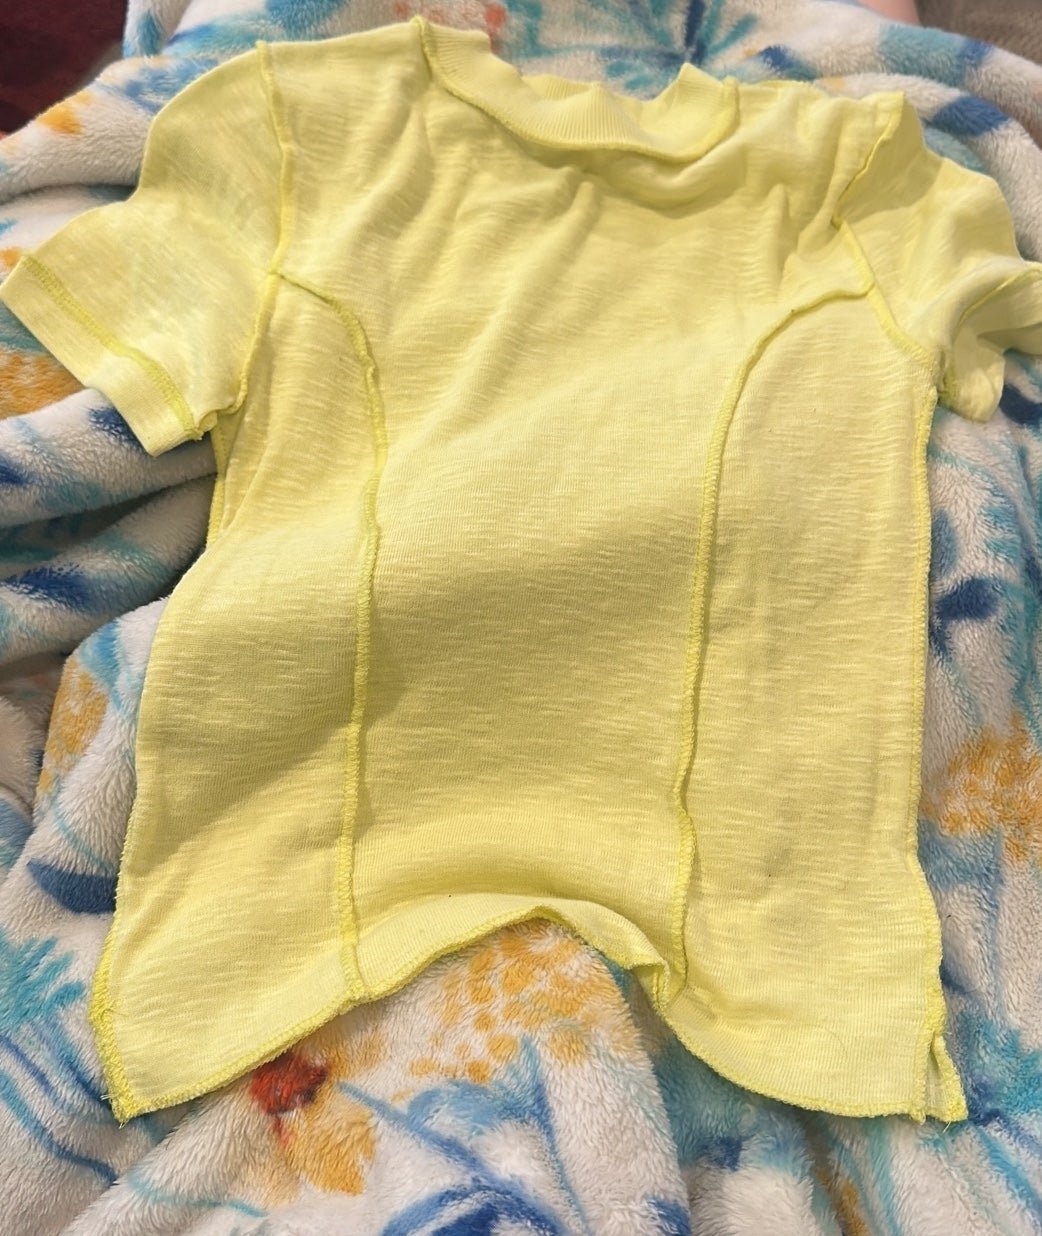 Authentic BDG urban outfitters yellow shirt PdIBt3G3A US Sale